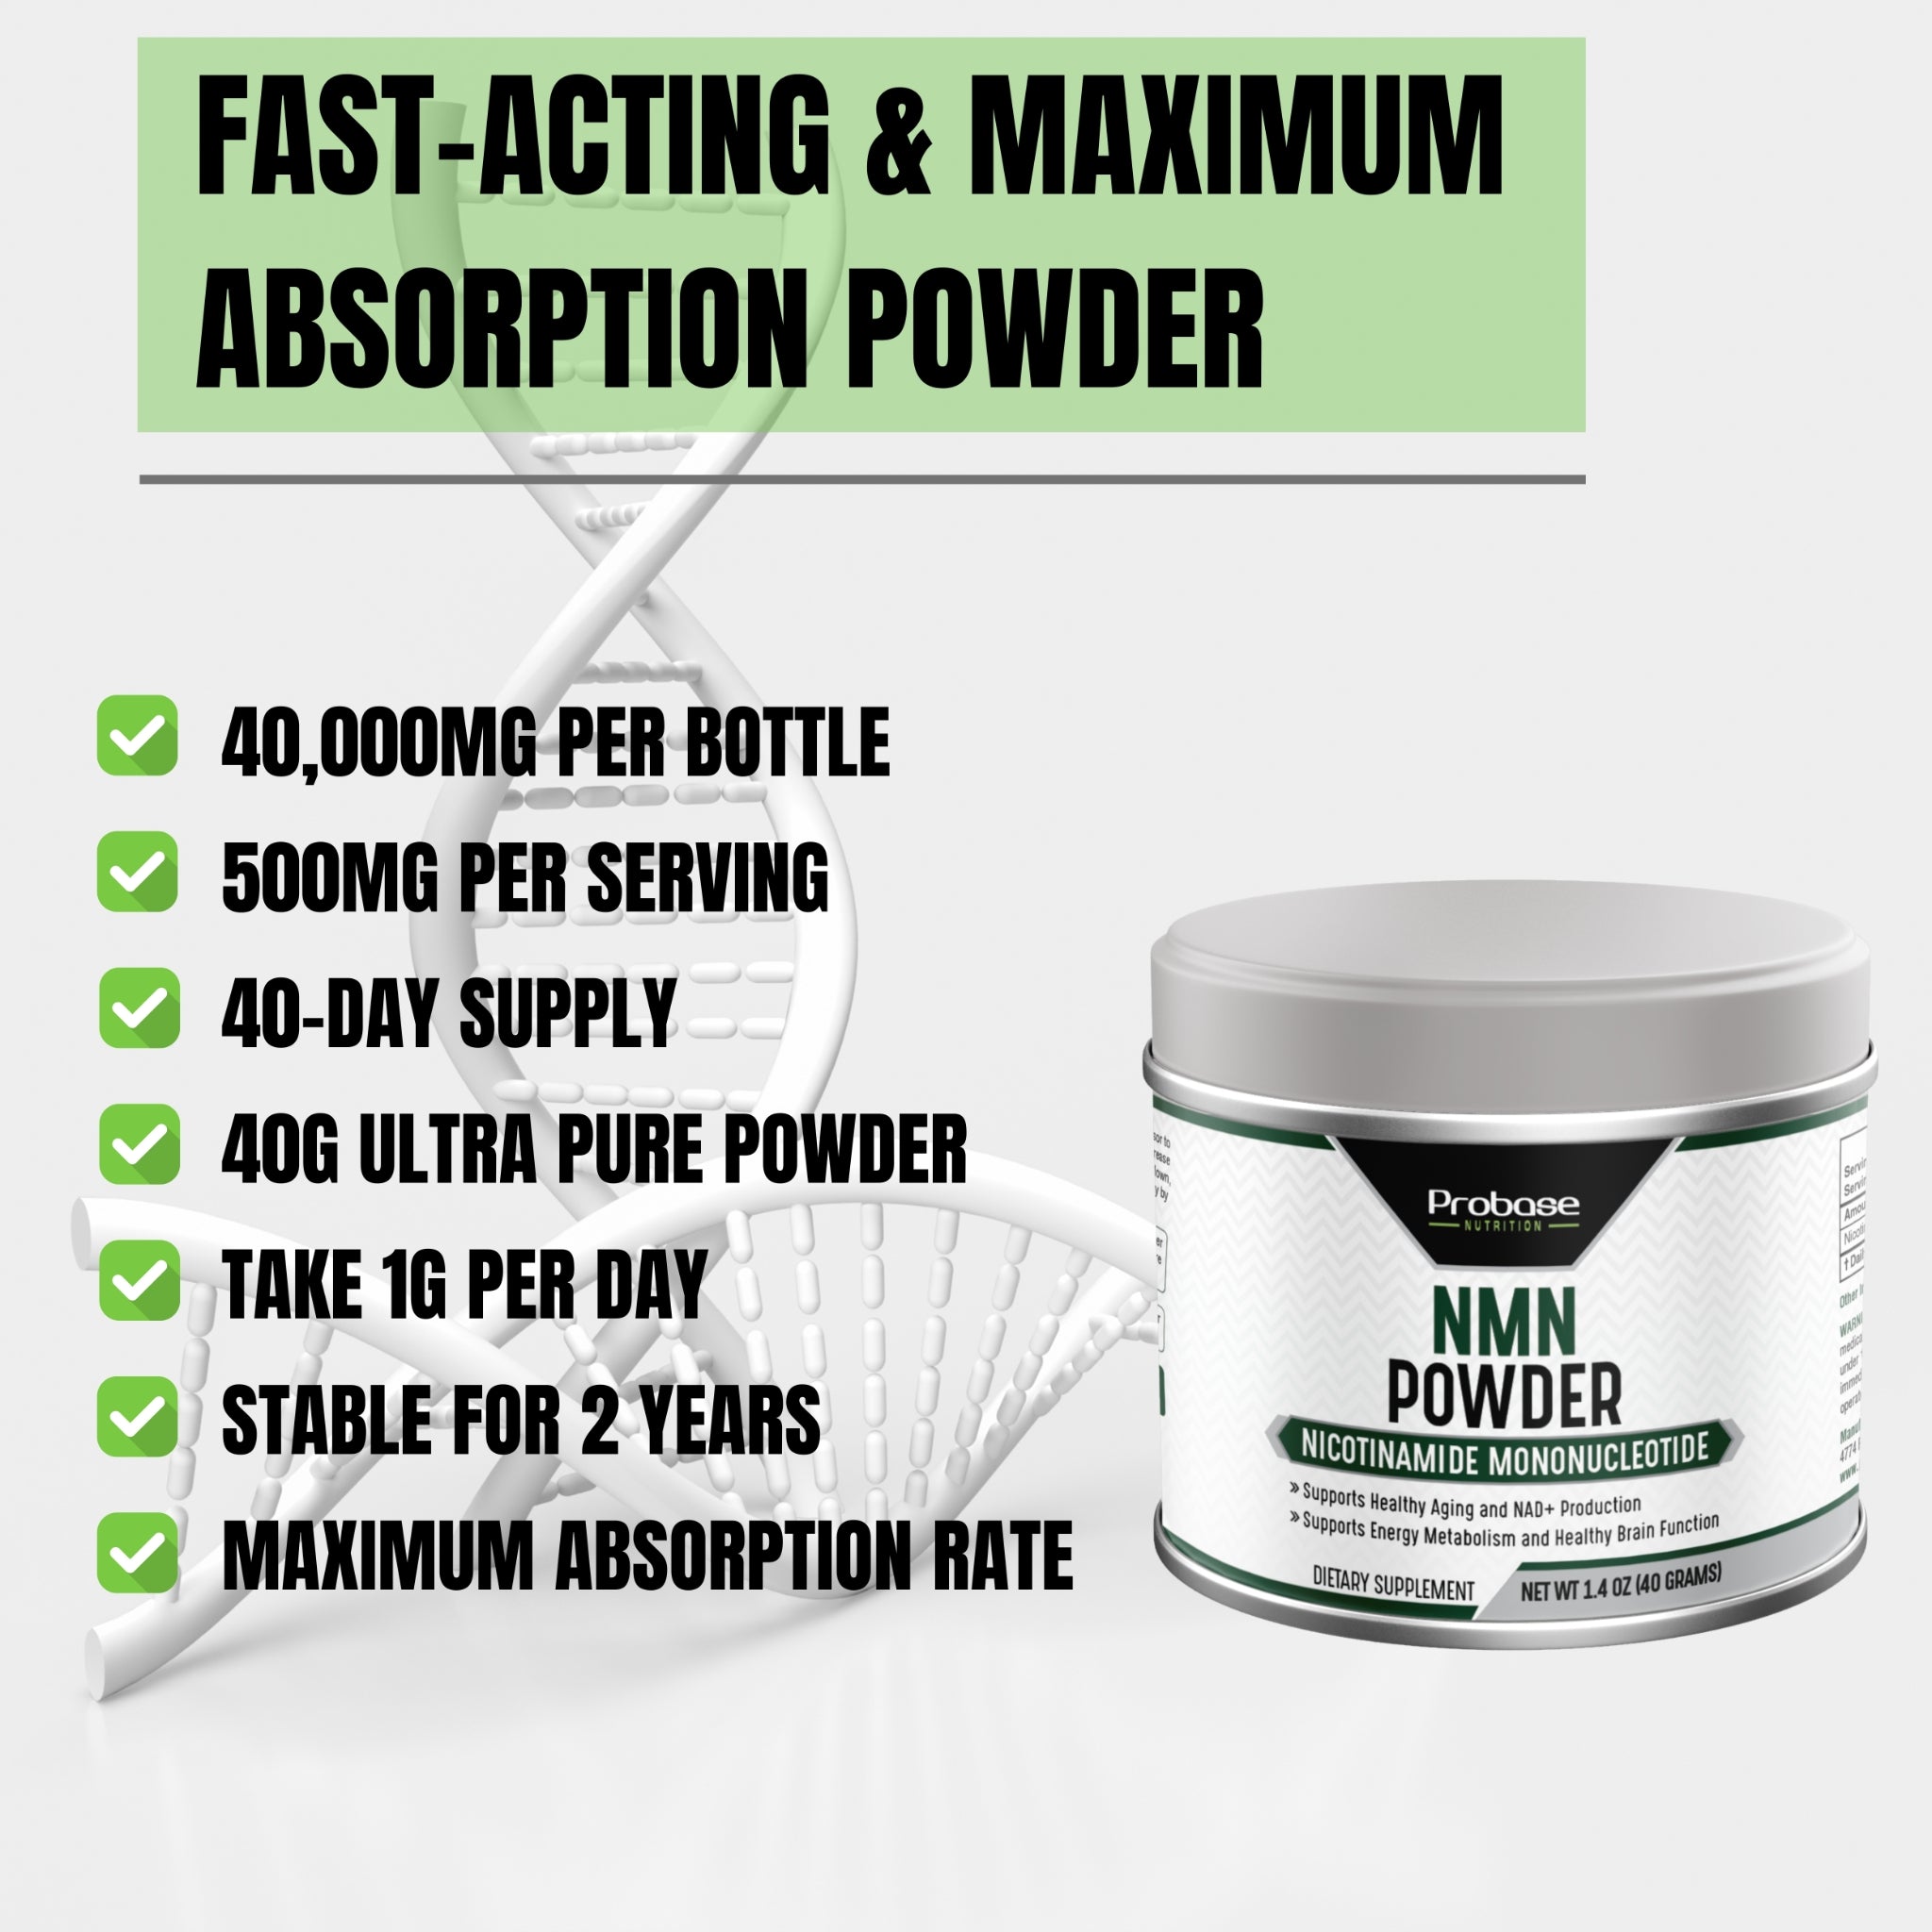 Startling Research on a New Anti-Aging Supplement NMN - Probase Nutrition